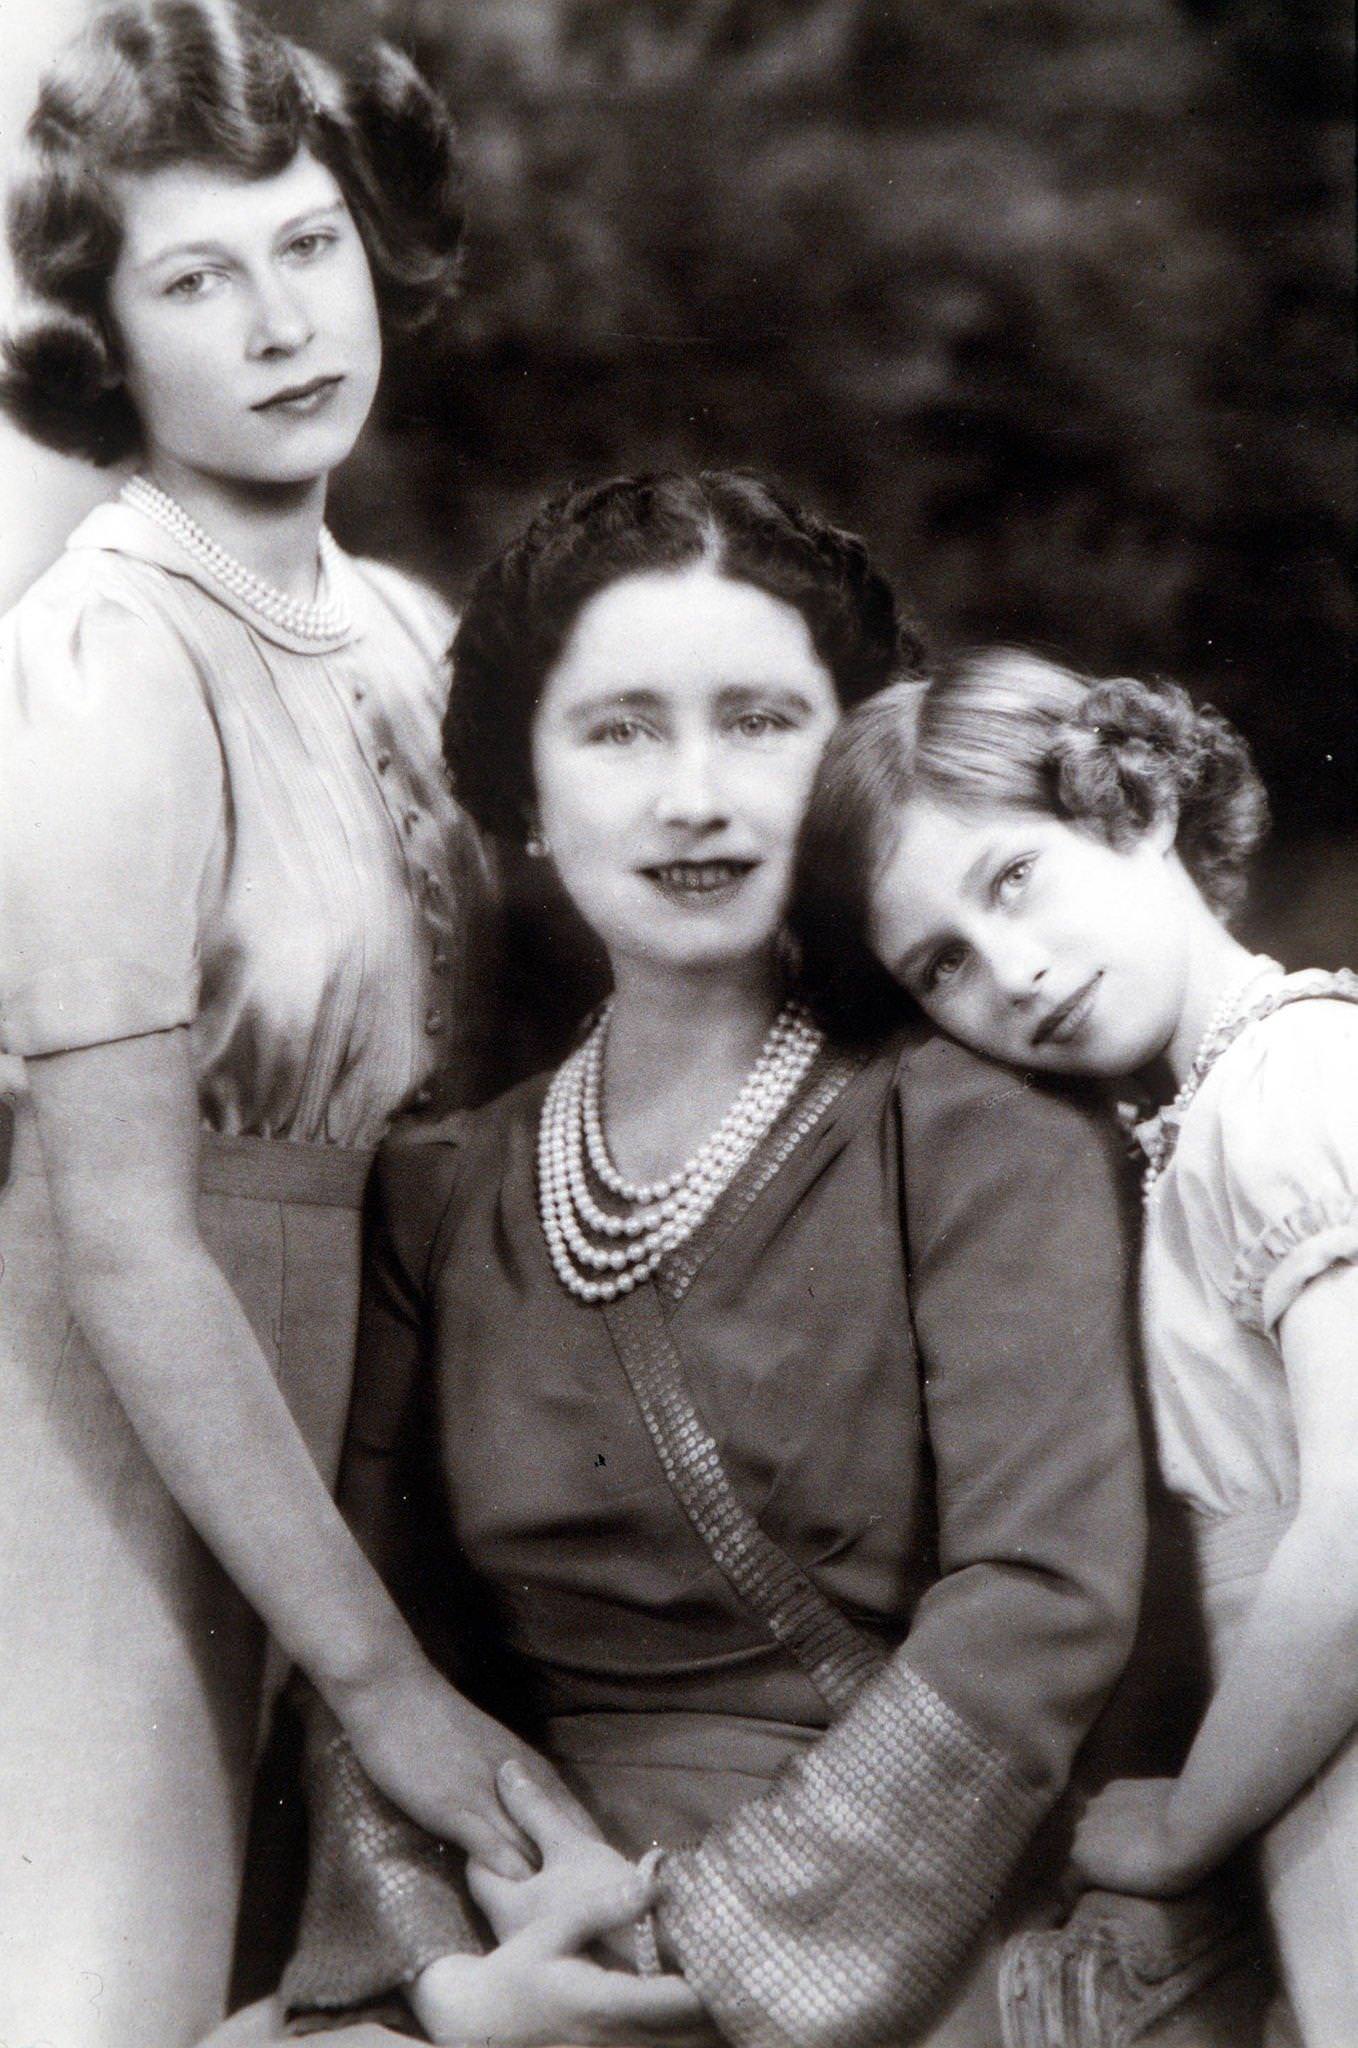 Queen Elizabeth (later The Queen Mother) with her two daughters, Princess Margaret (right) and Princess Elizabeth who later became Queen Elizabeth II in 1940.